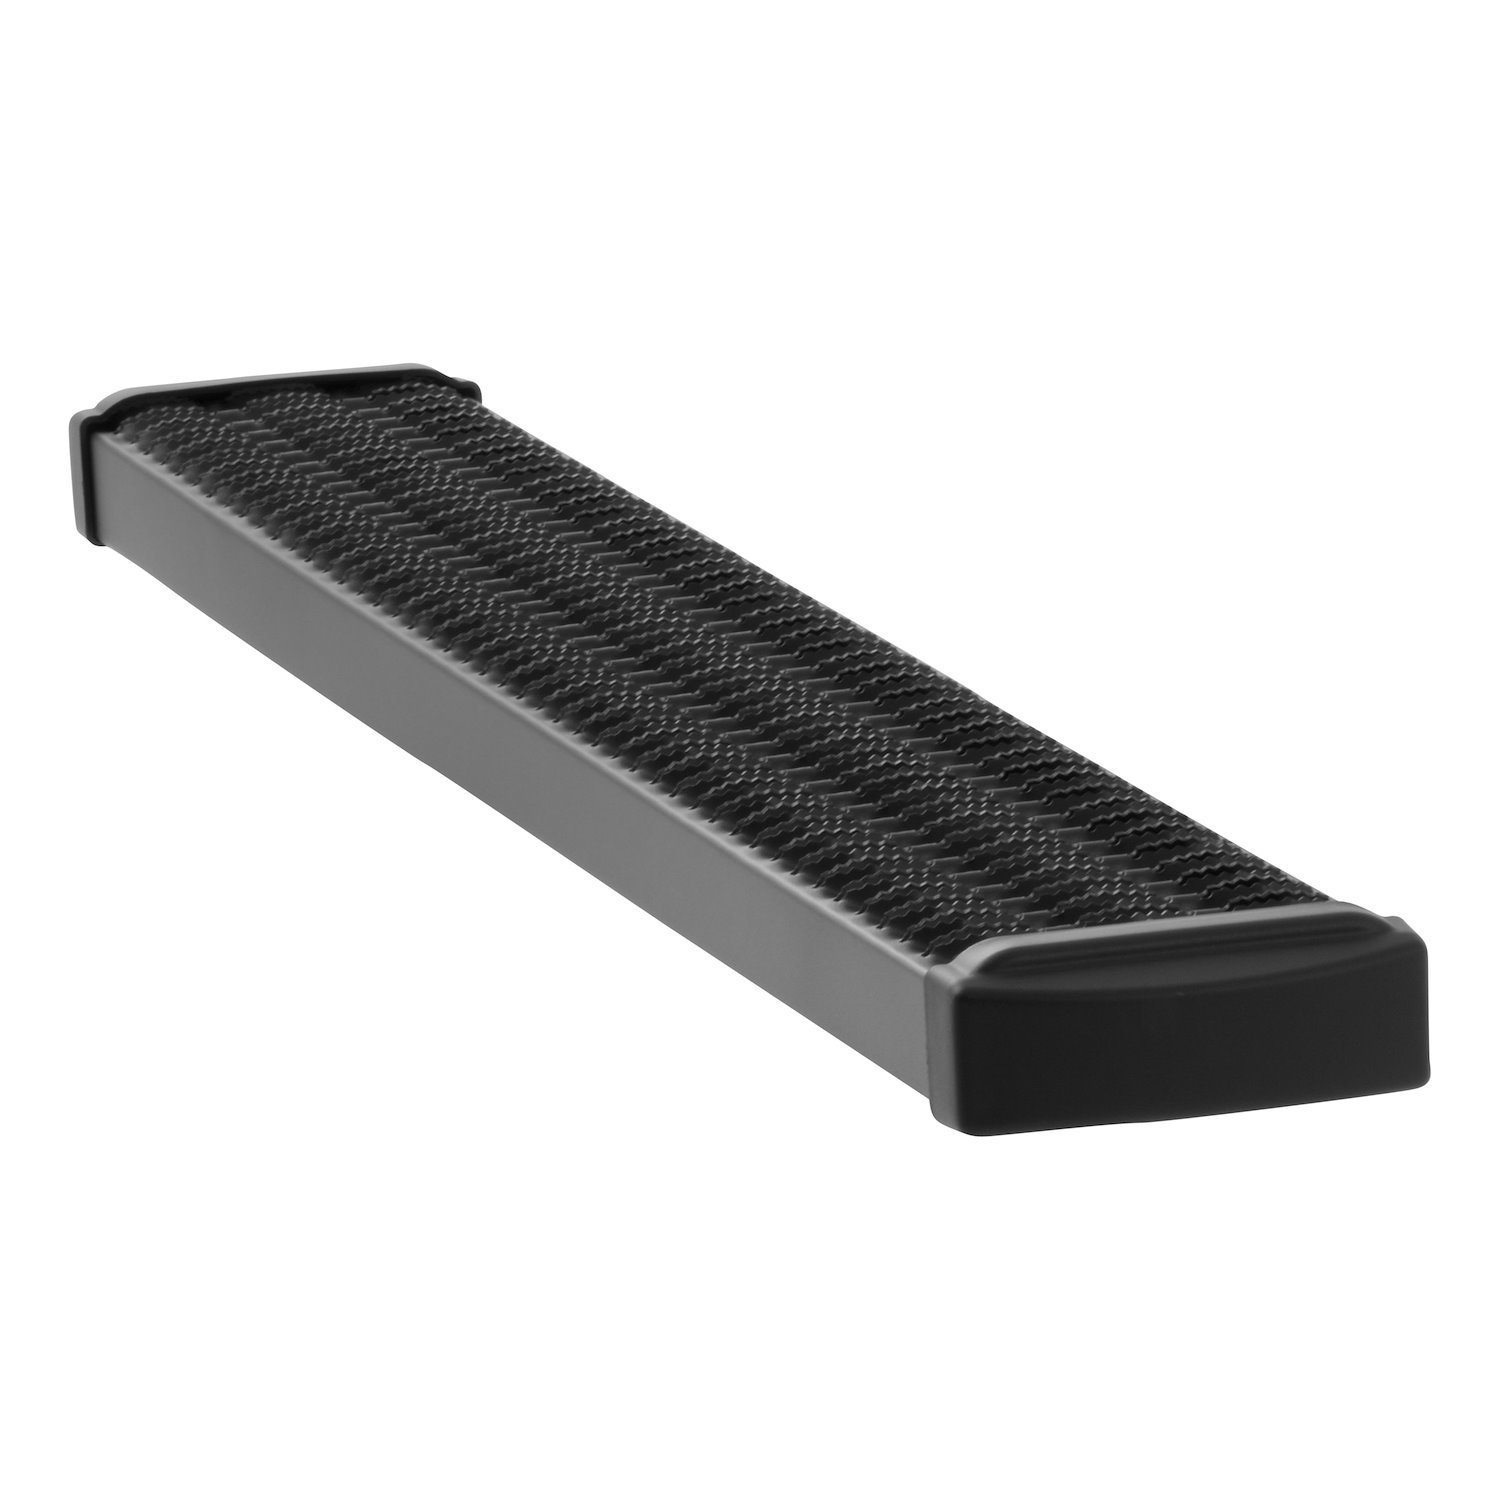 415254-401478 Grip Step 7 in. x 54 in. Black Aluminum Rear Step Fits Select Ram ProMaster